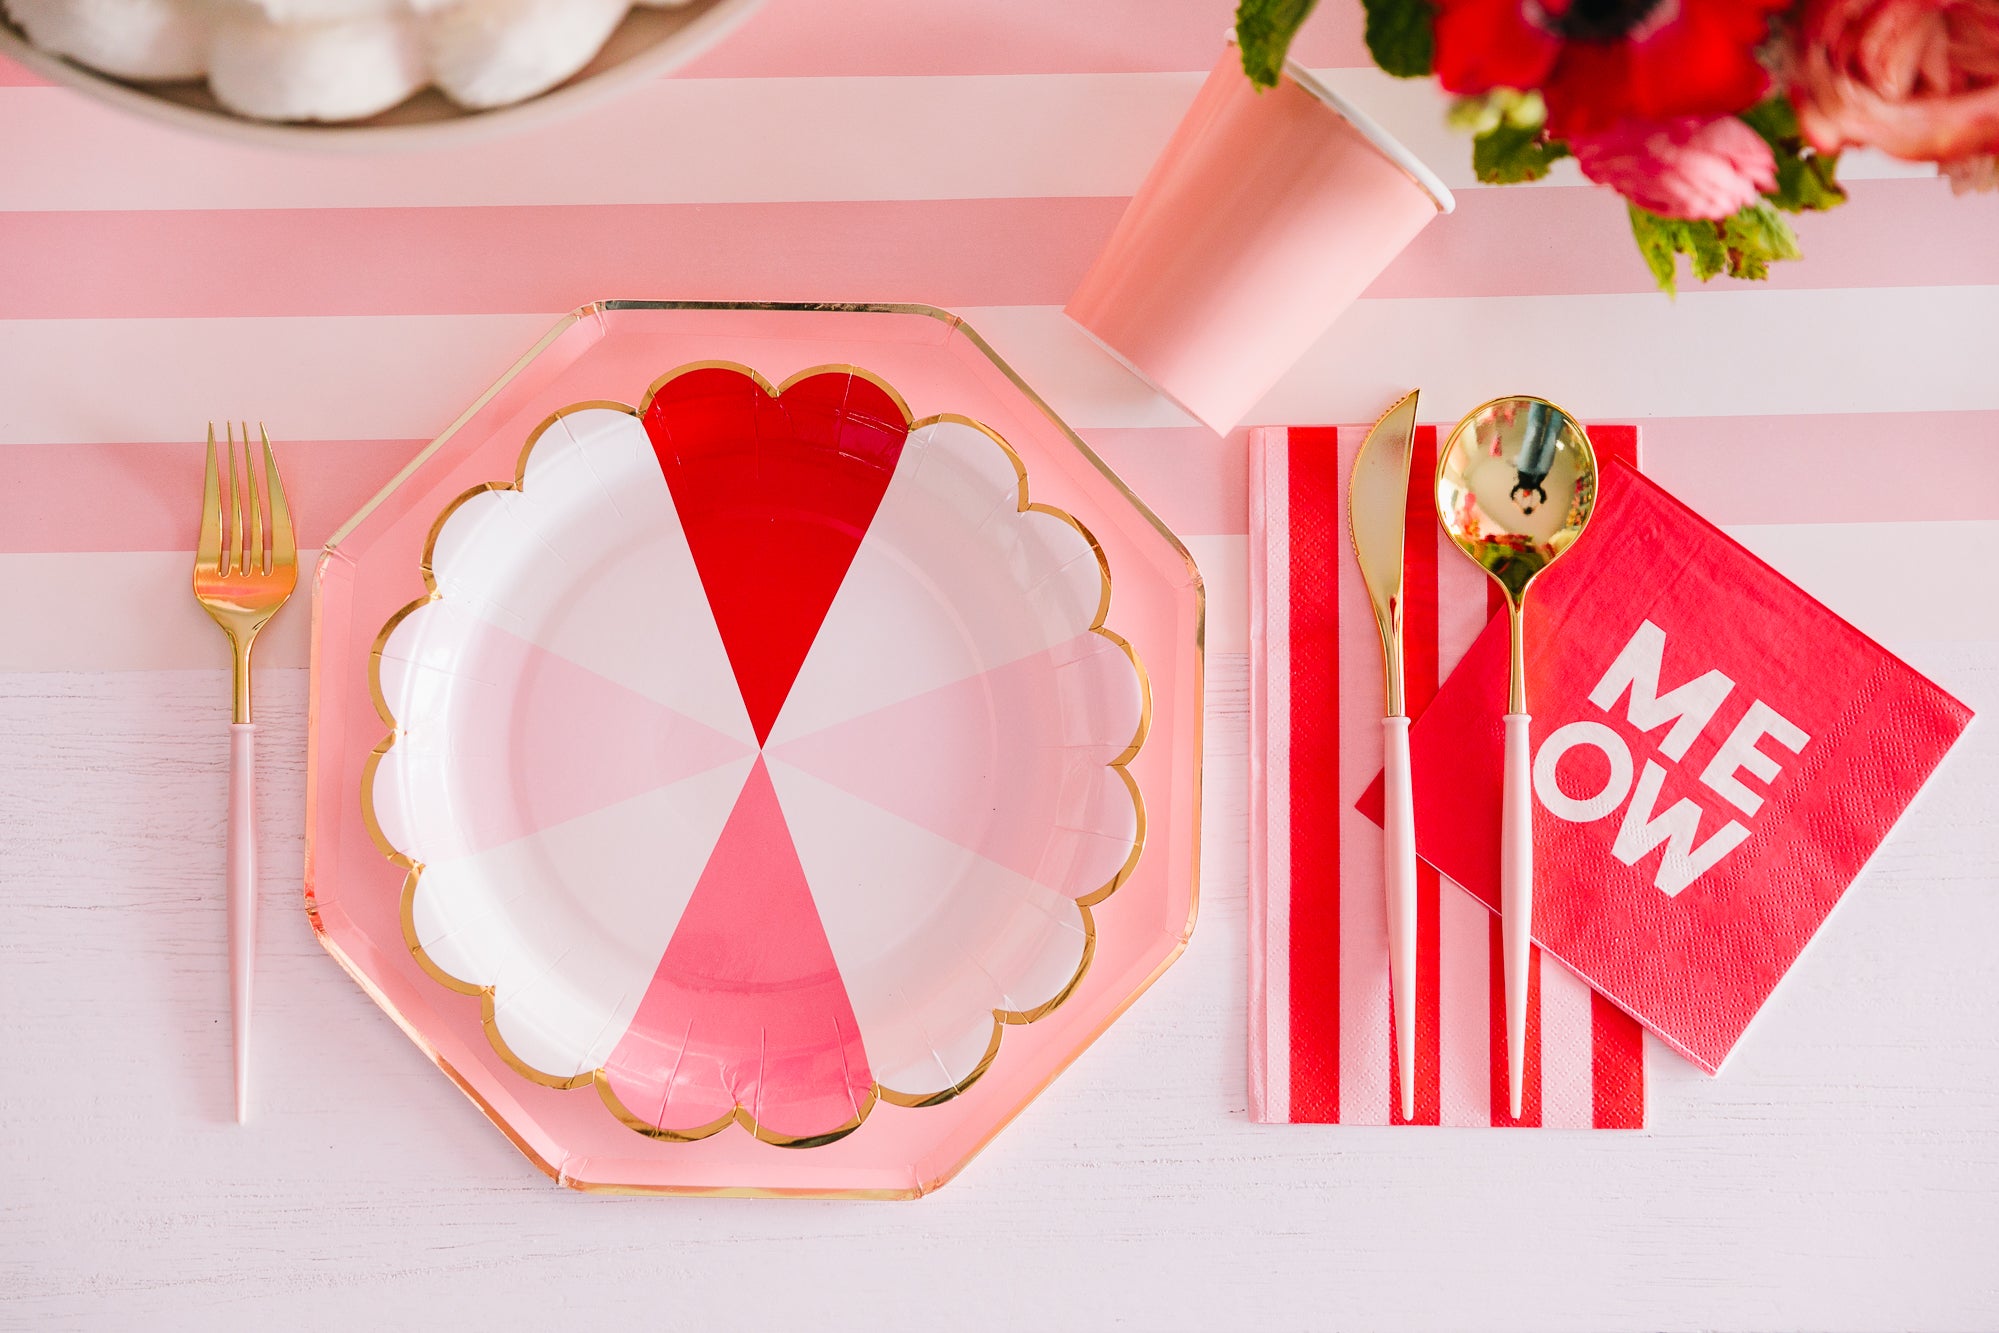 Red and pink striped plates and napkins with other Valentine's Day themed tableware